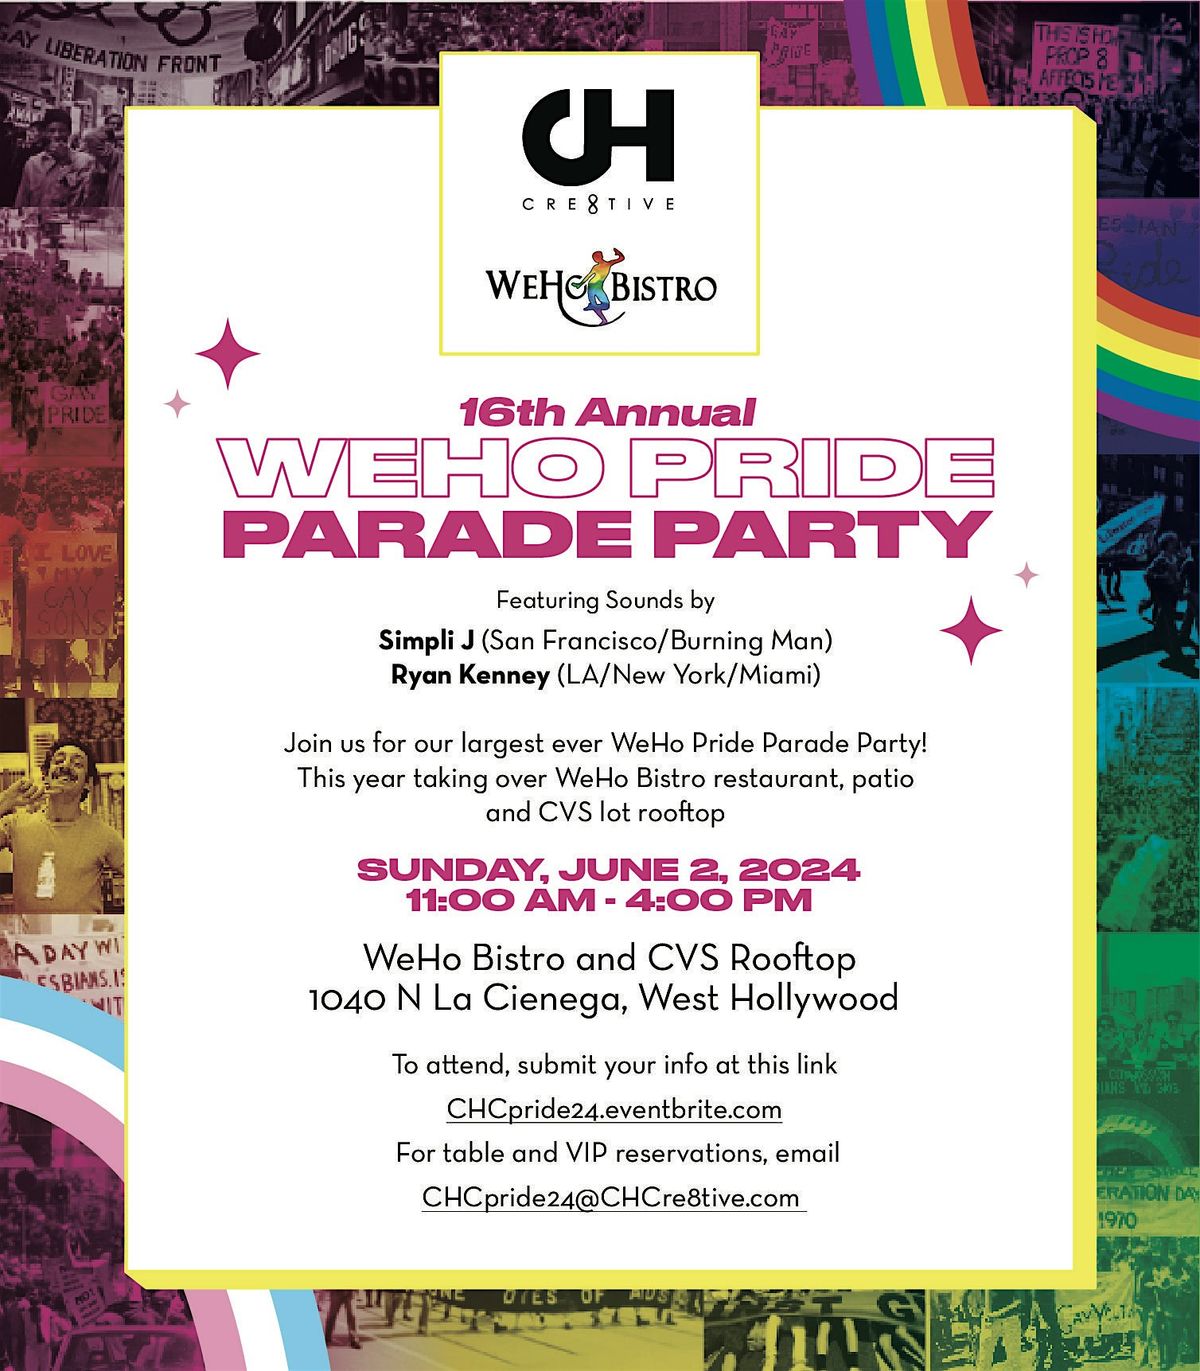 CHC Pride at Weho Bistro